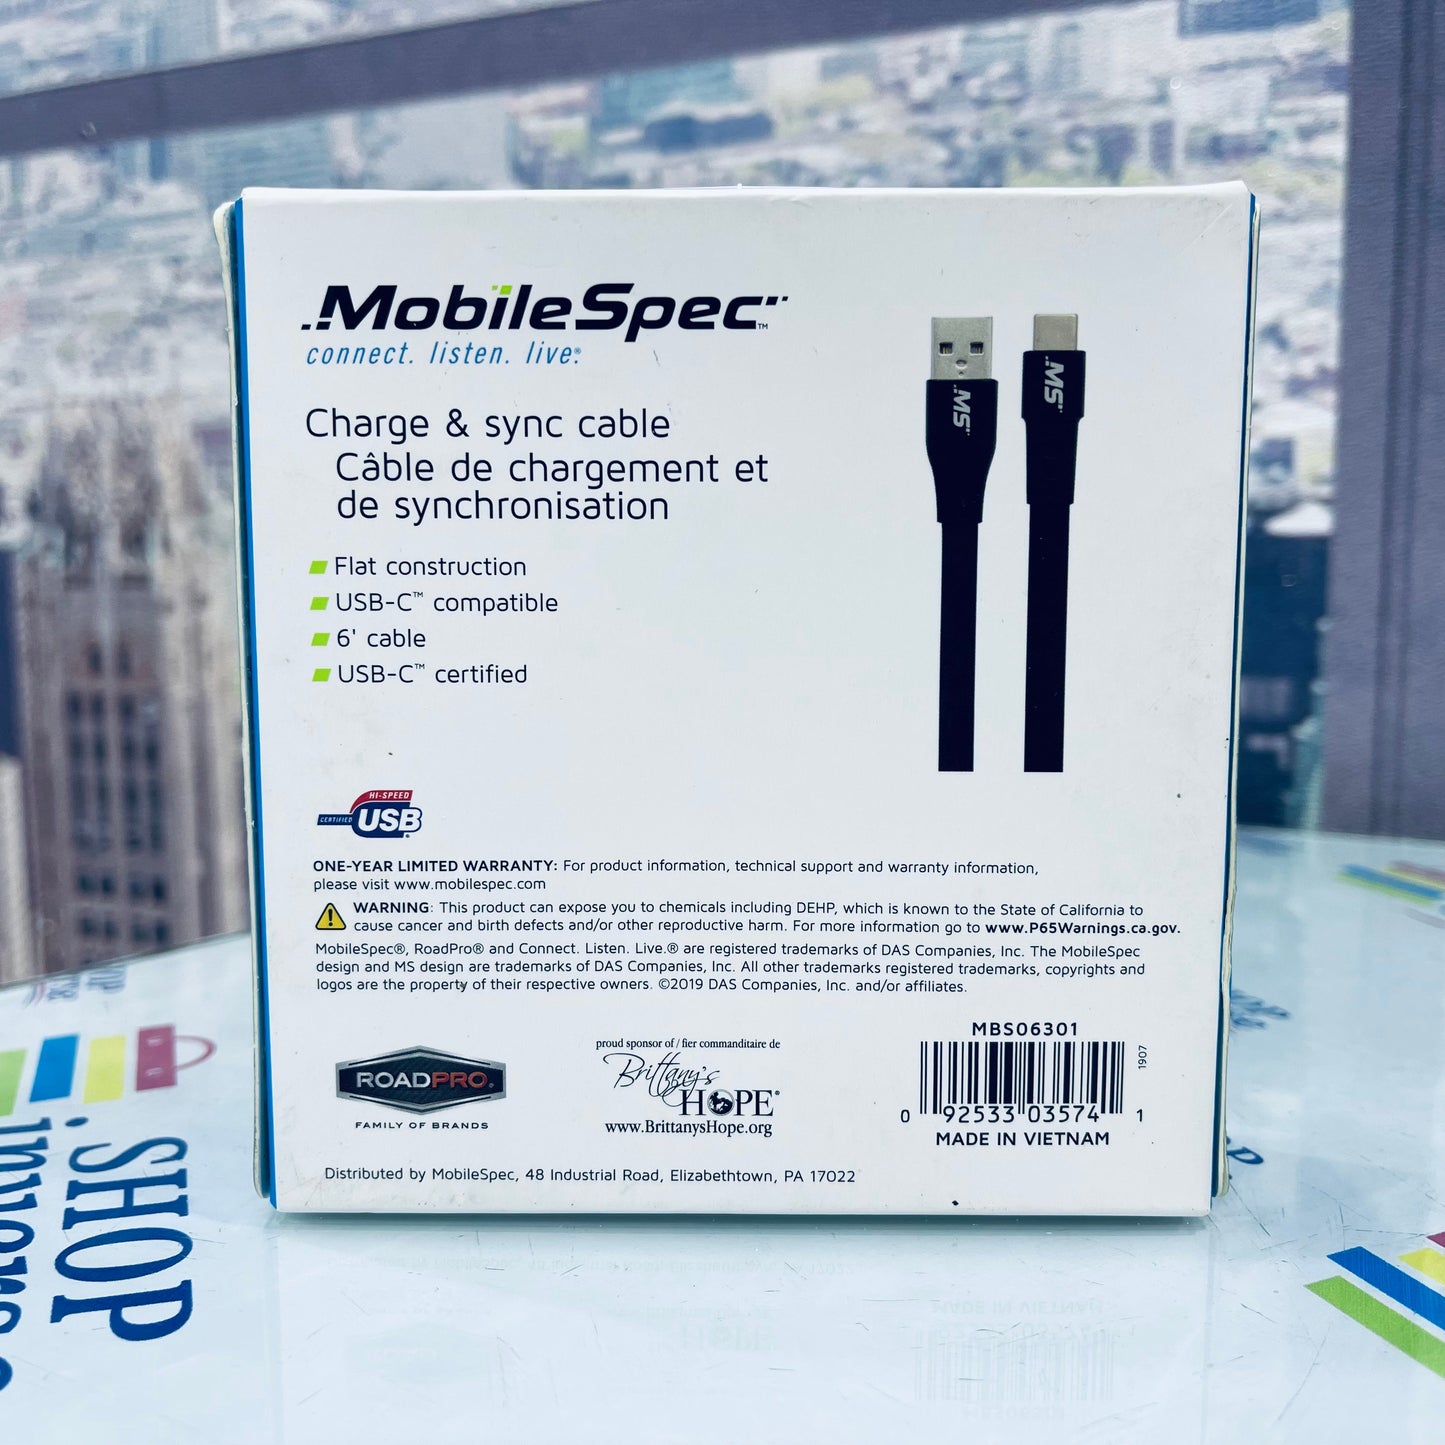 MobileSpec Charge & Sync Cable - USB-C SHOPINVERSE